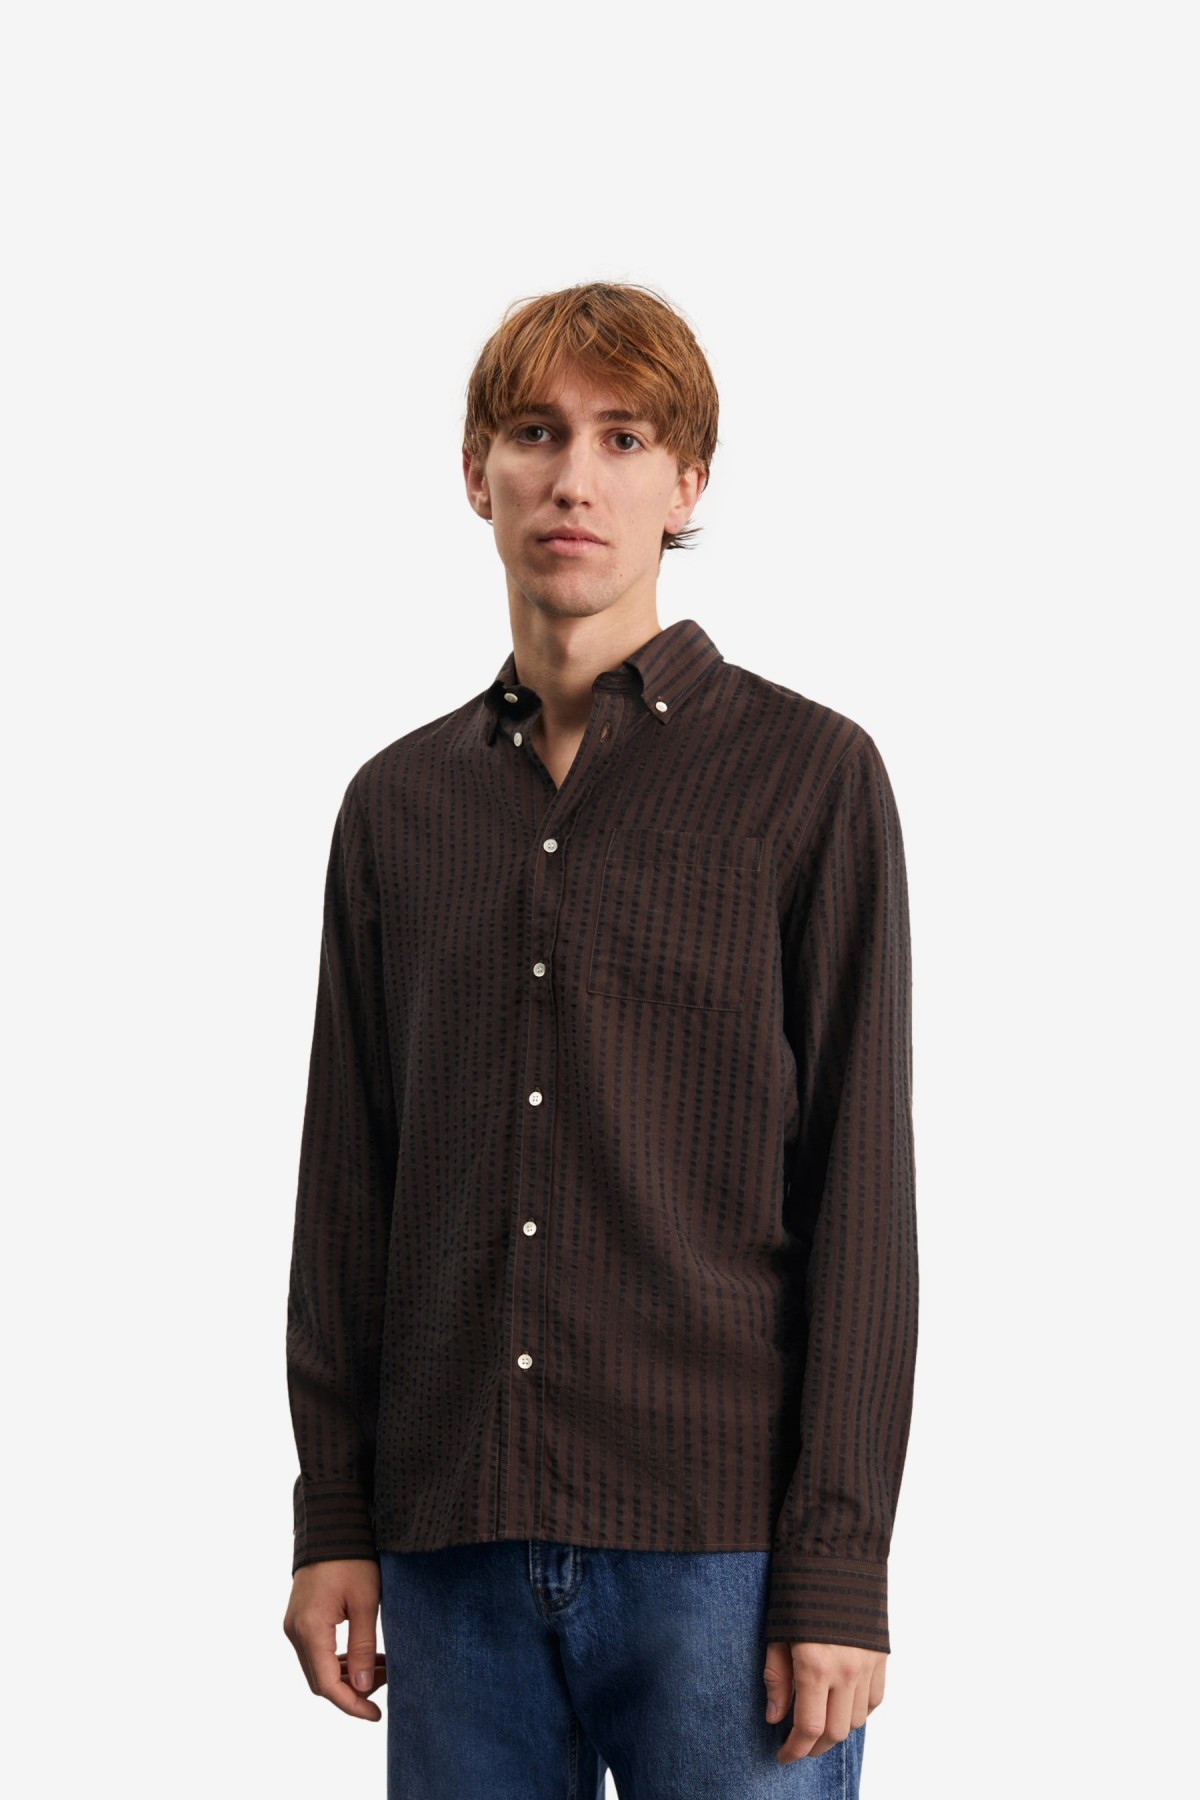 Another Aspect Shirt 1.0 in Dark Brown